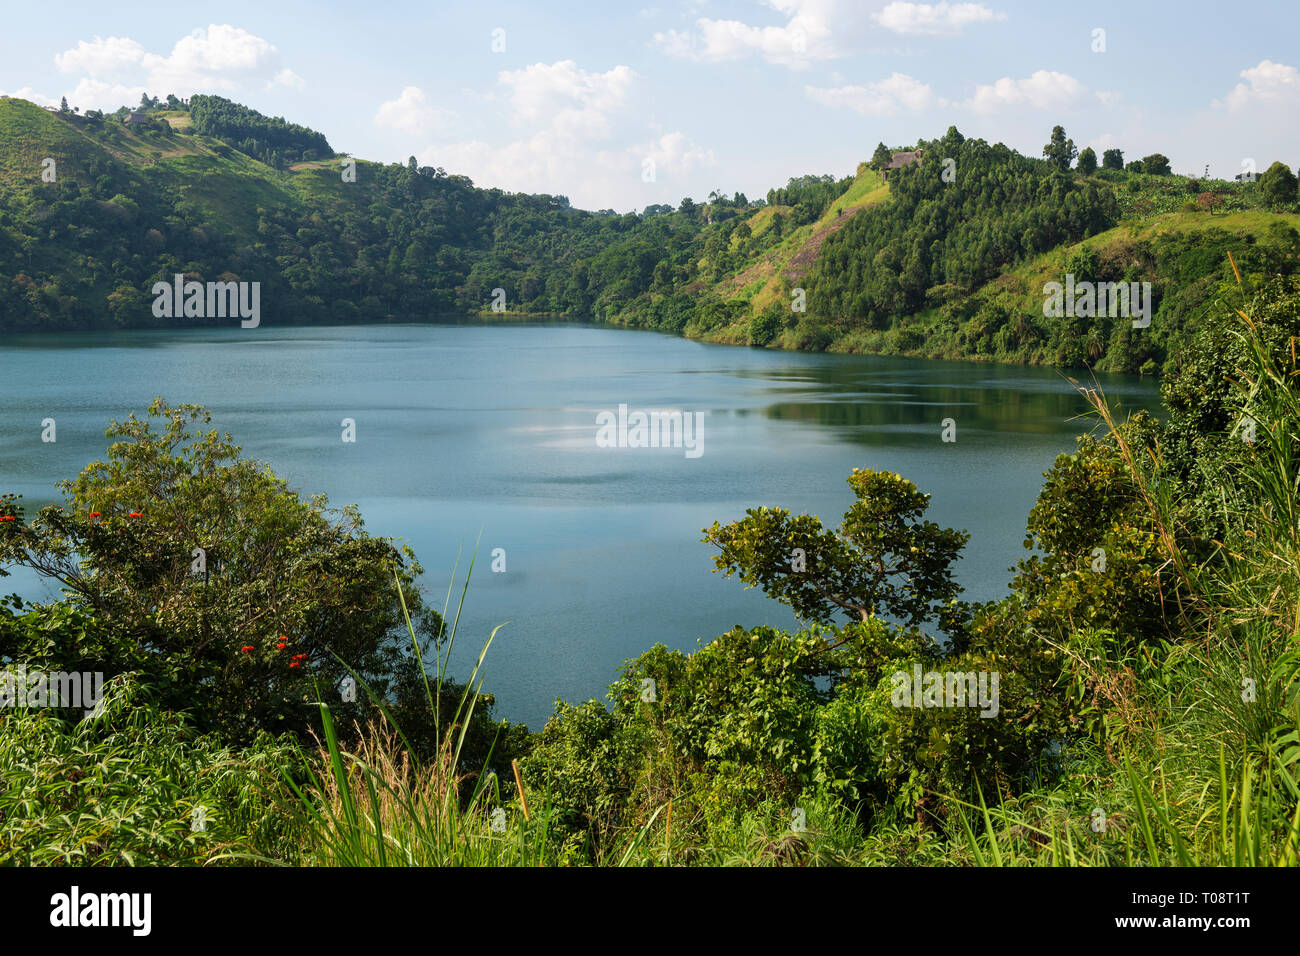 View of Nyinabulitwa Crater Lake located close to Kibale Forest National Park, South West Uganda, East Africa Stock Photo